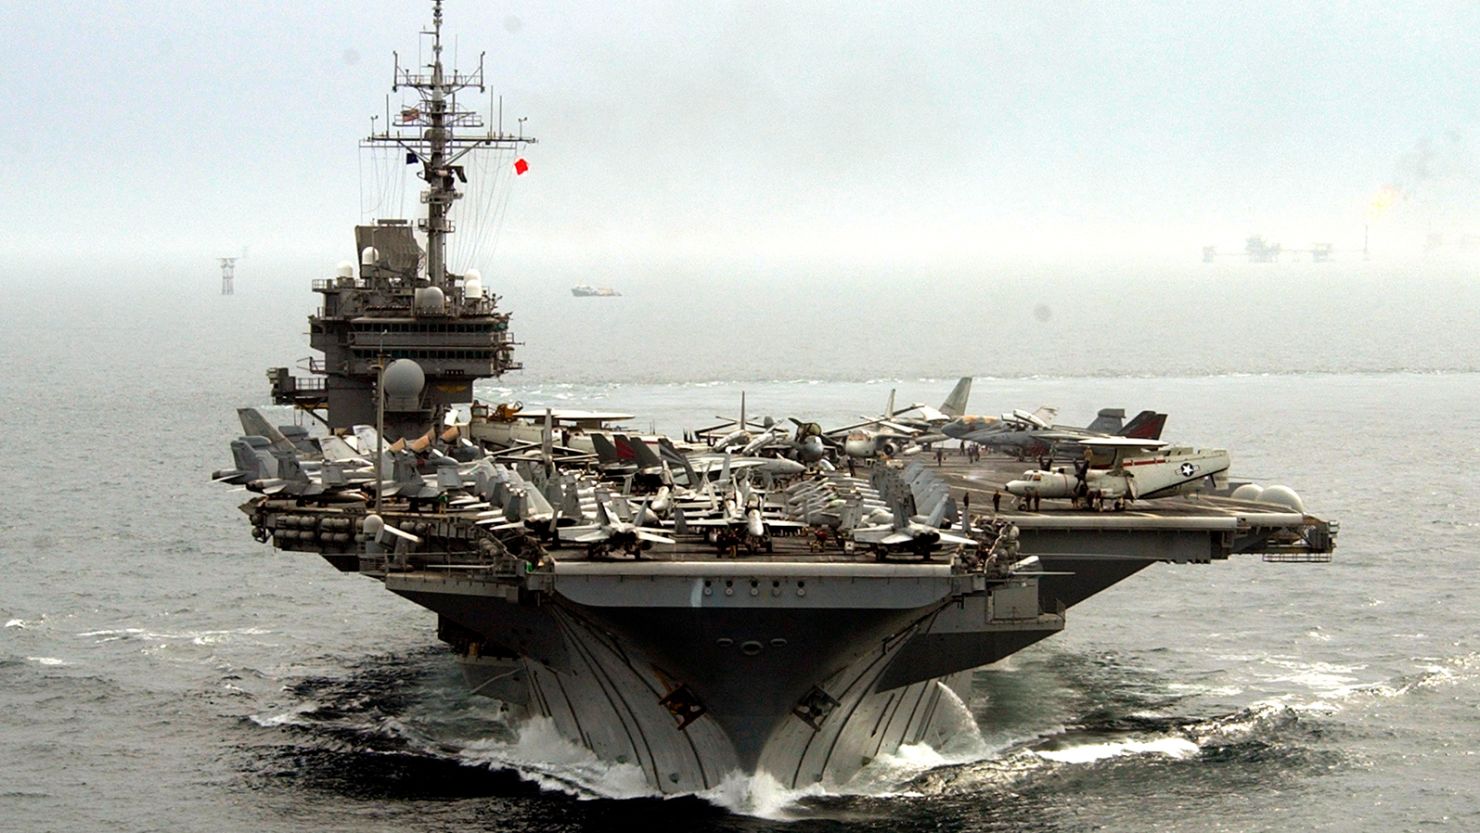 The Navy Will Scrap the First Nuclear-Powered Carrier: USS Enterprise